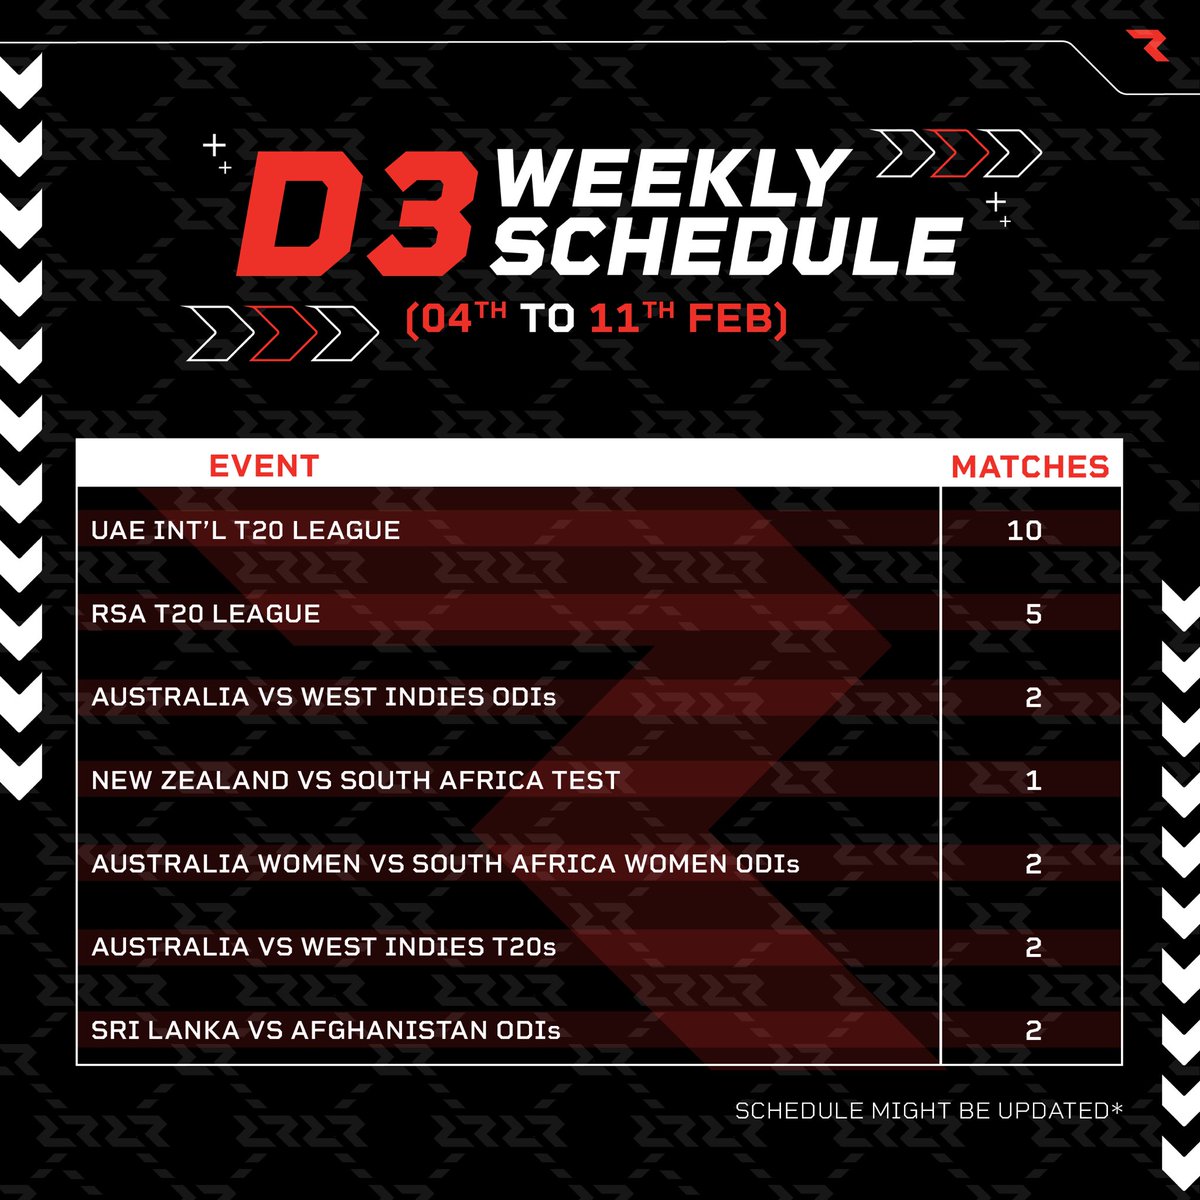 🗓️ D3 Schedule for Upcoming Week is Out Now 🗓️ Time to mark your calendars! #RaringToGo #Rario